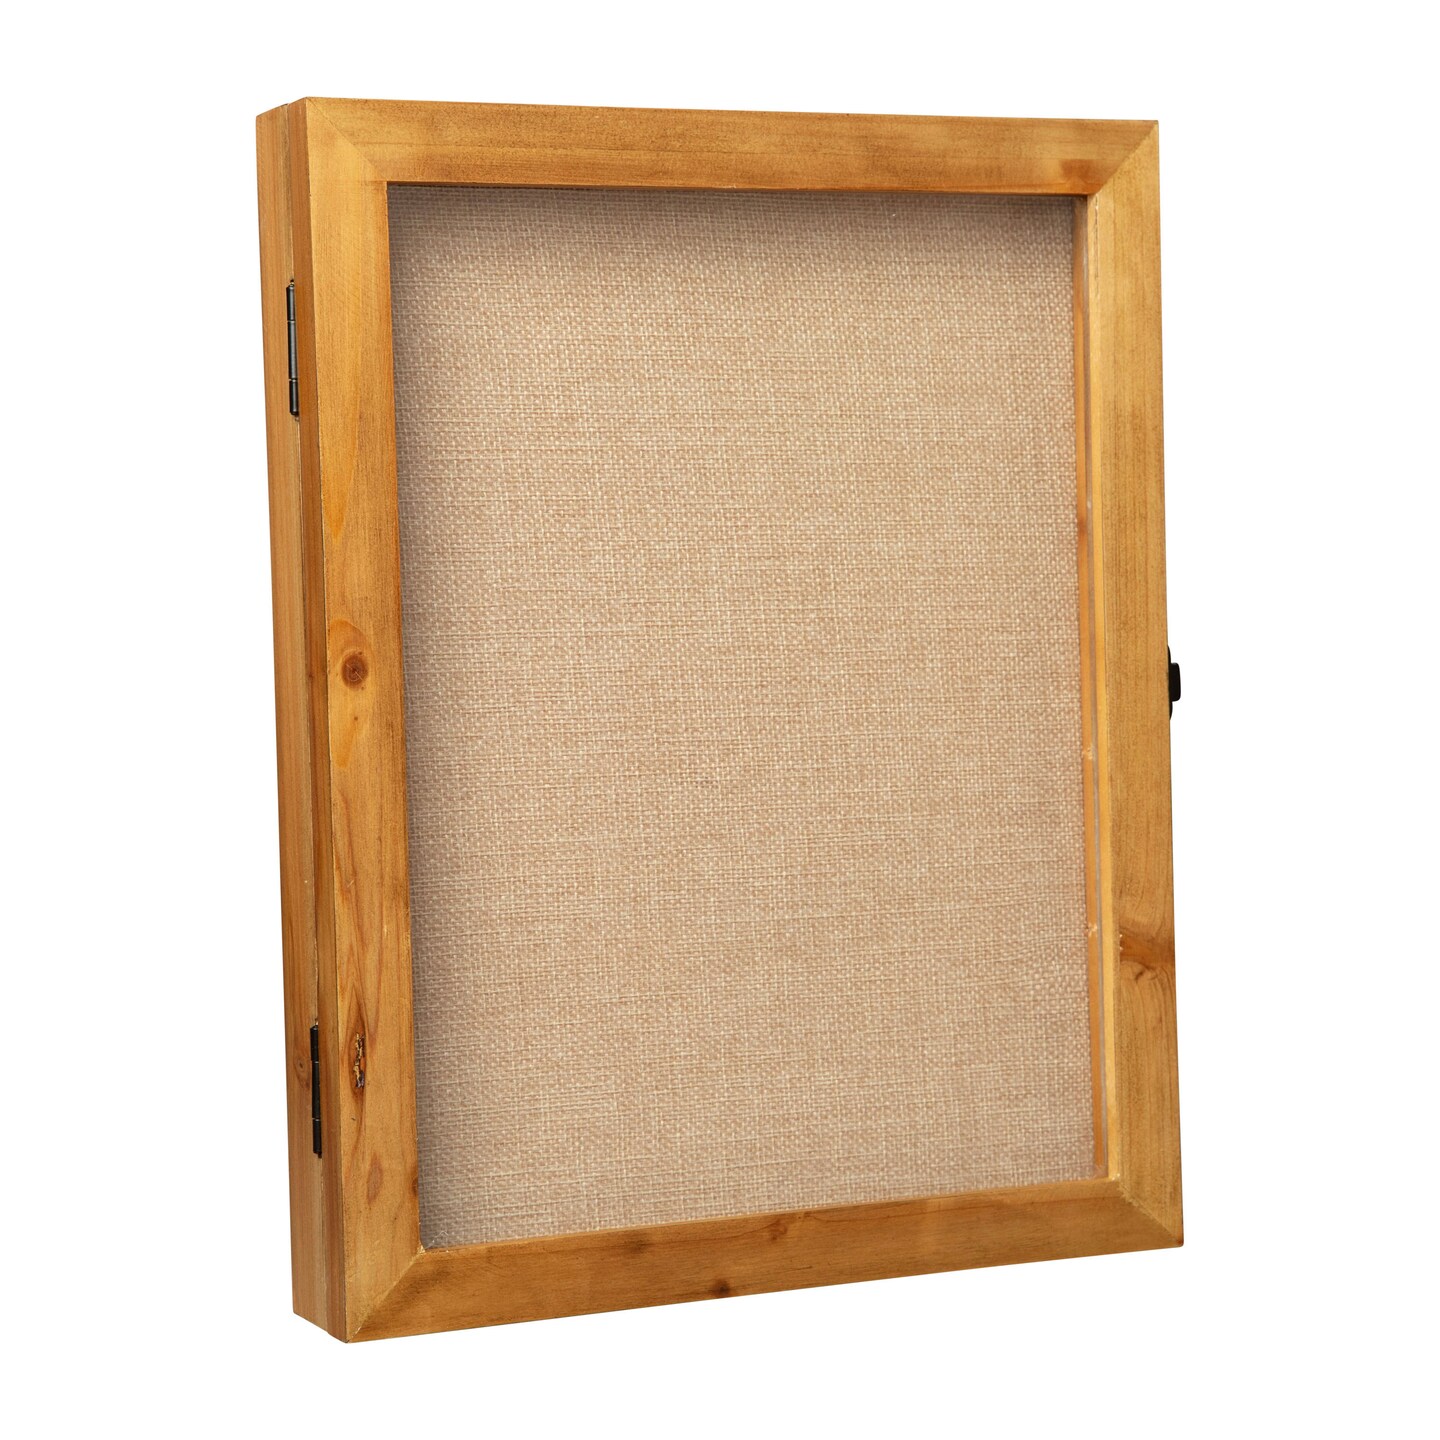 HBCY Creations Wood Shadow Box Display Case - Solid Wood with Acrylic Window - Security Latch - For Mementos and Keepsakes